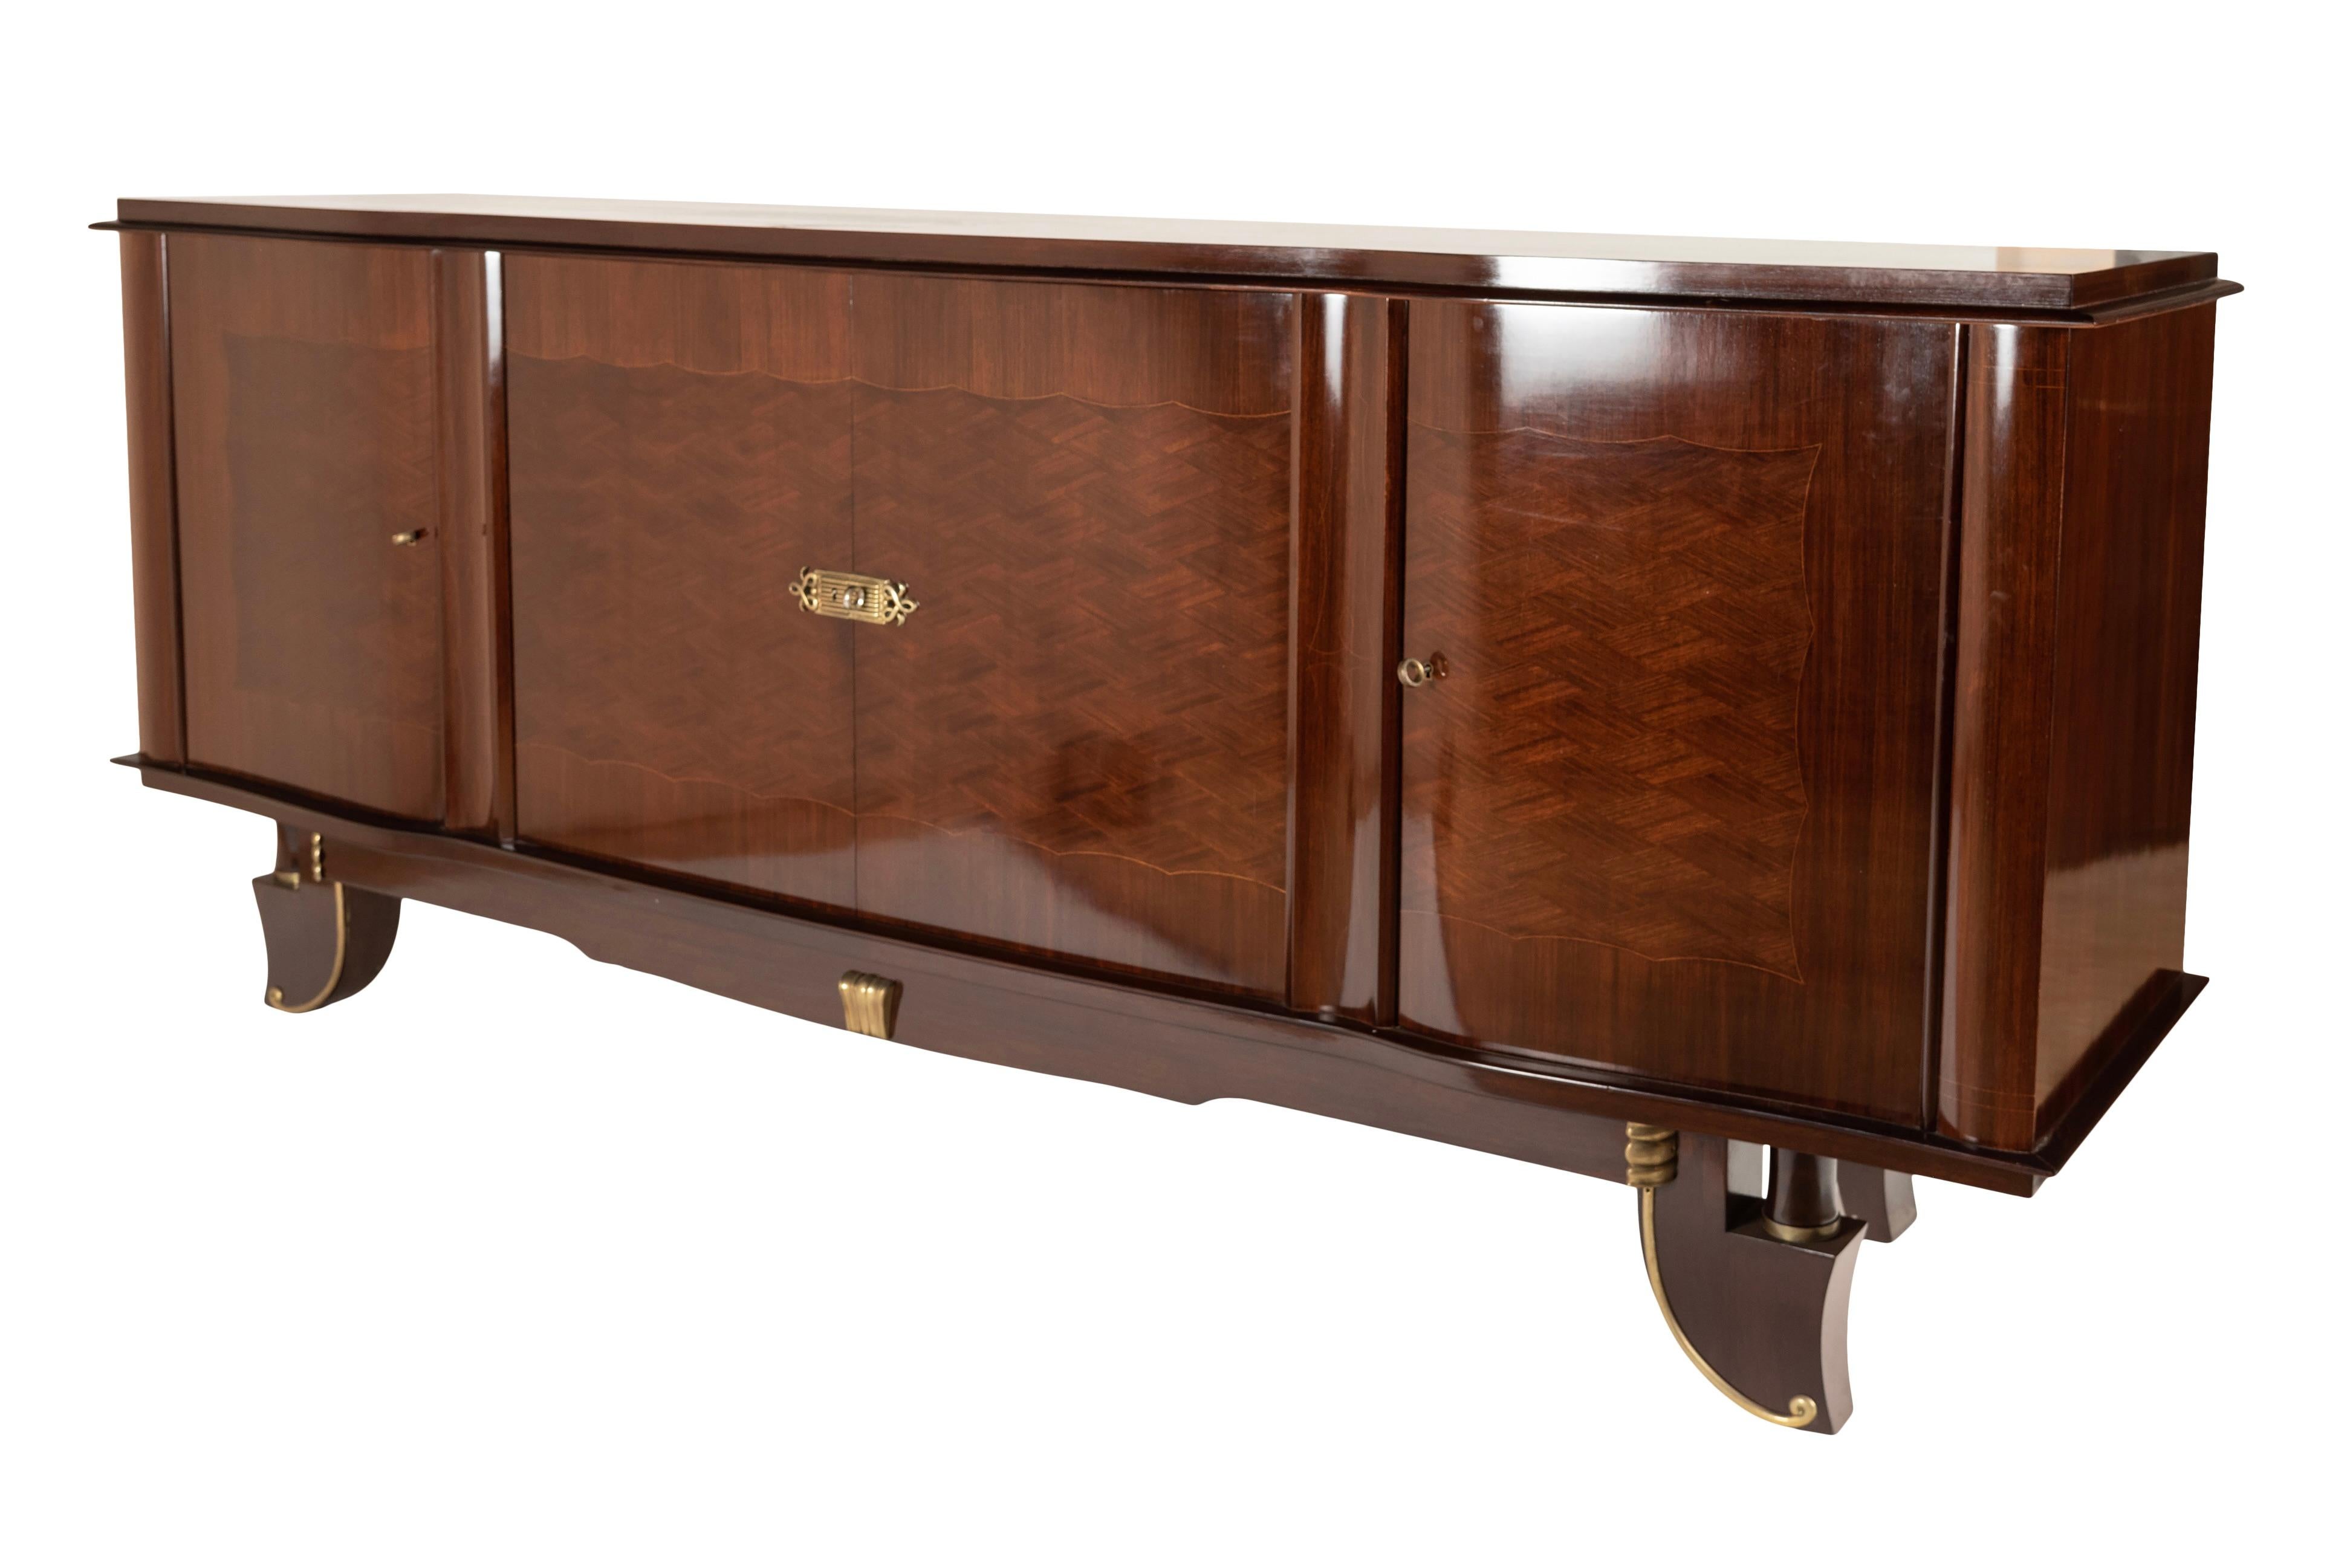 This exquisite sideboard dates back to the 1940s and embodies the timeless elegance and sophistication of French design from that era. Every detail has been meticulously crafted, from the finely worked brass fittings to the intricate appliqués.

The